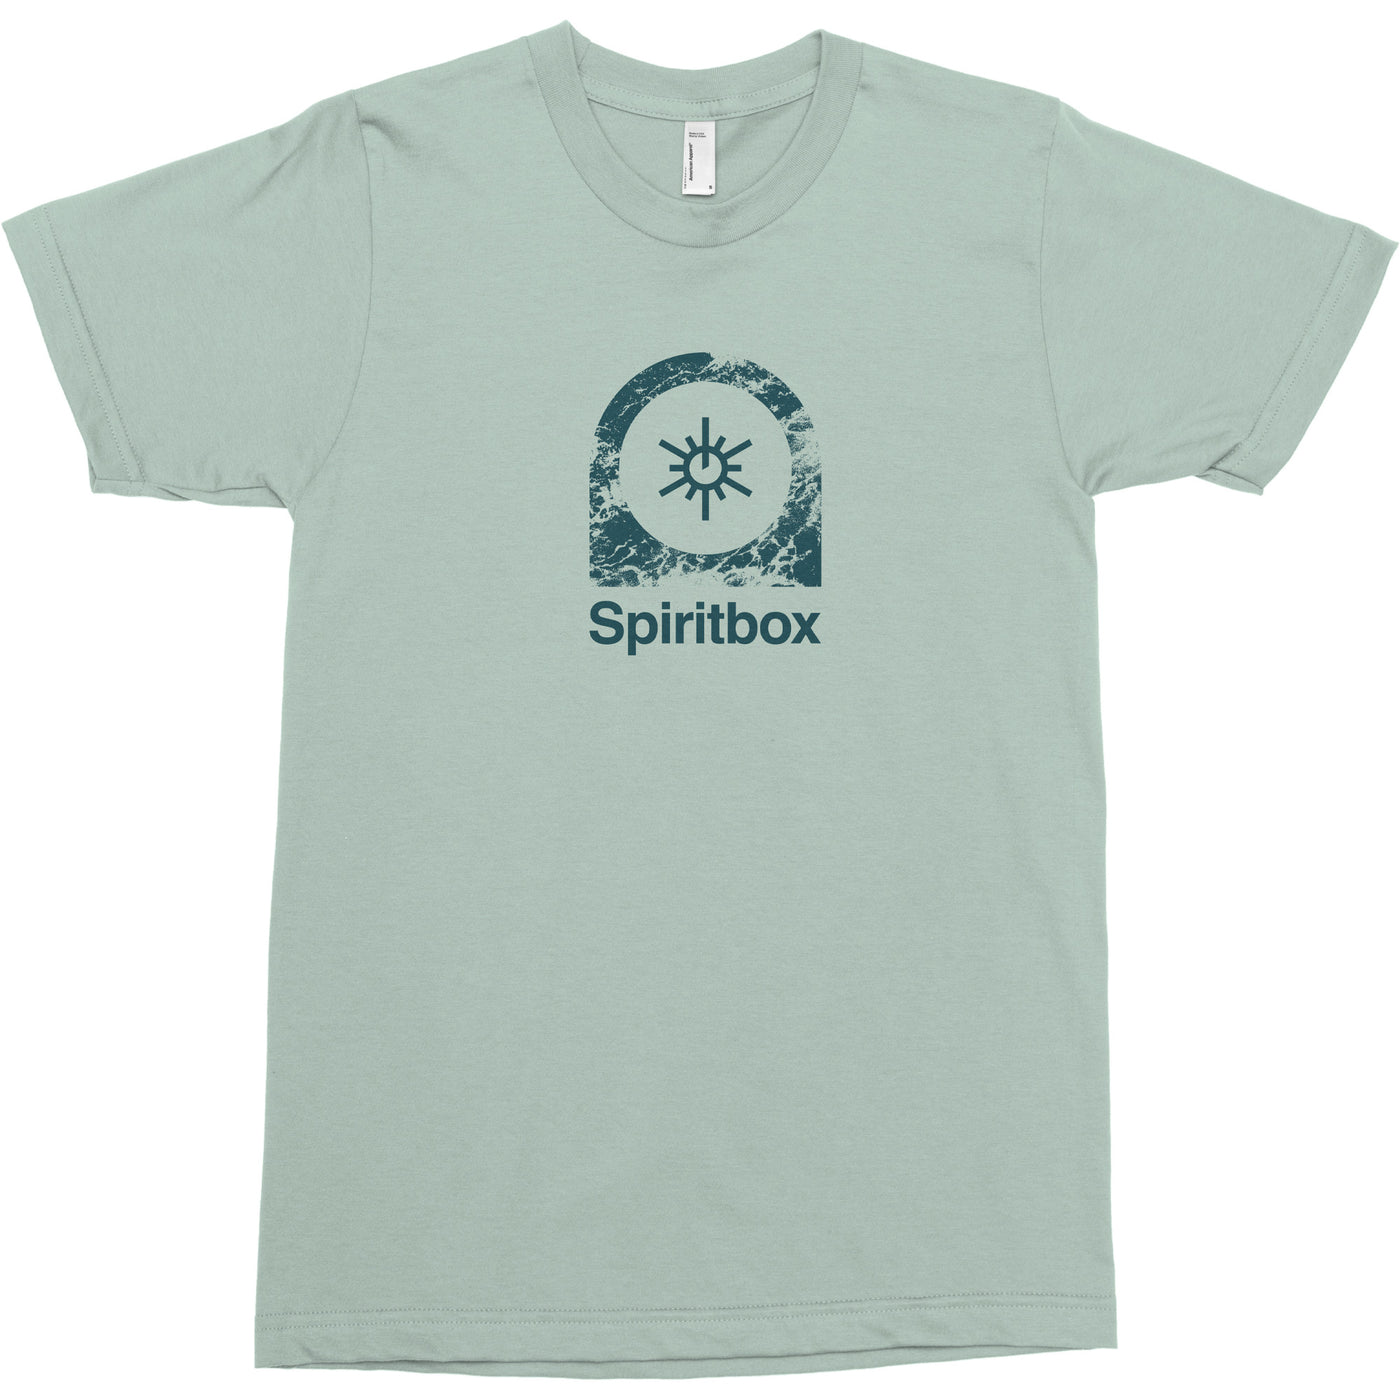 front of a light blue/gray tshirt against white background. the center of the shirt features a sun symbol in dark blue. surrounding it is a circle that is blue and white marble fill. below this in dark blue text reads "spiritbox".